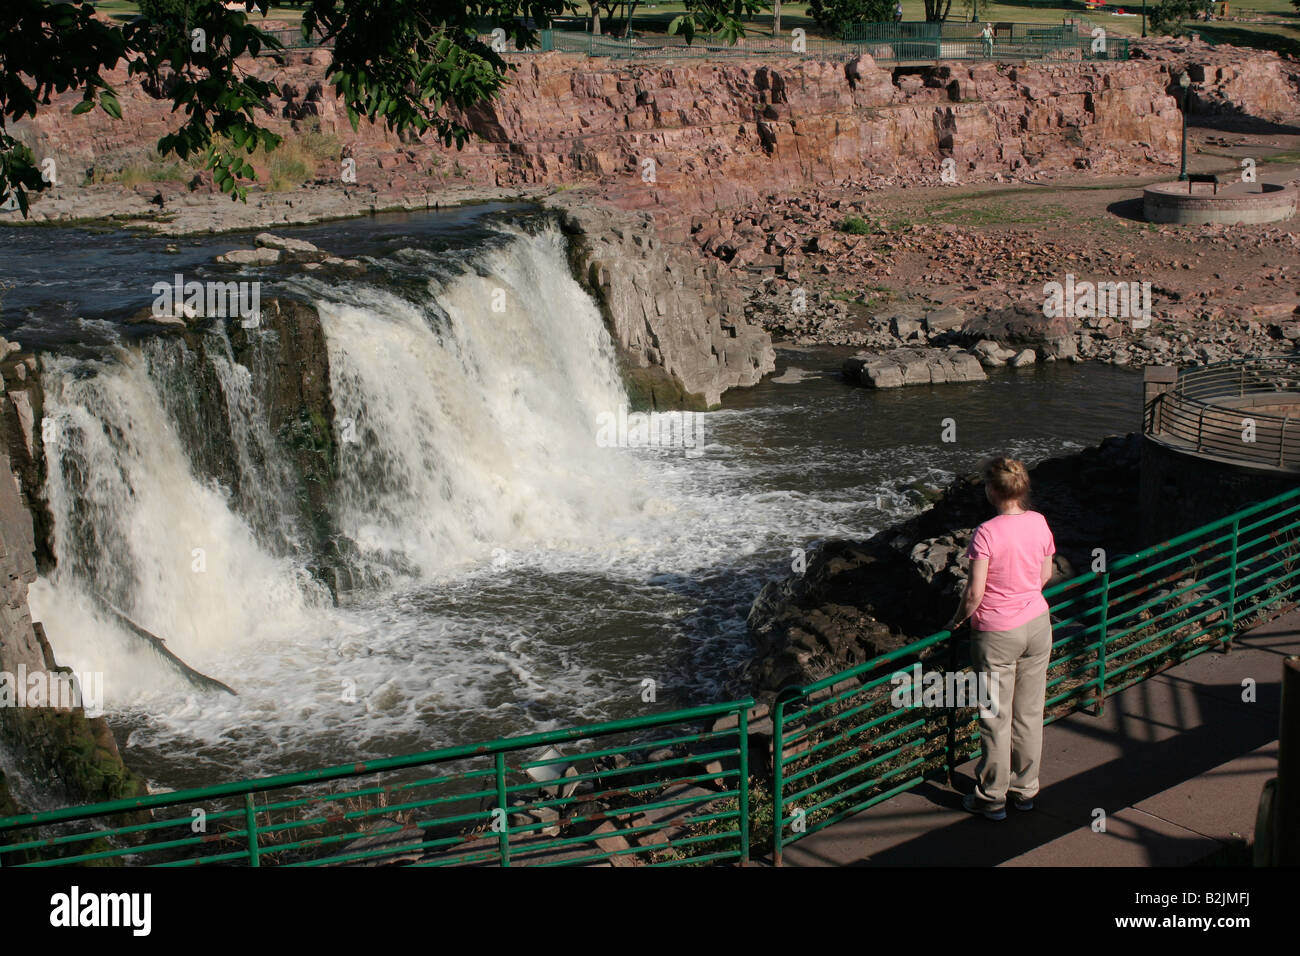 Falls viewing area Falls Park in Sioux Falls South Dakota. The pink rock is Quartzite from Sioux quartzite formation. Stock Photo